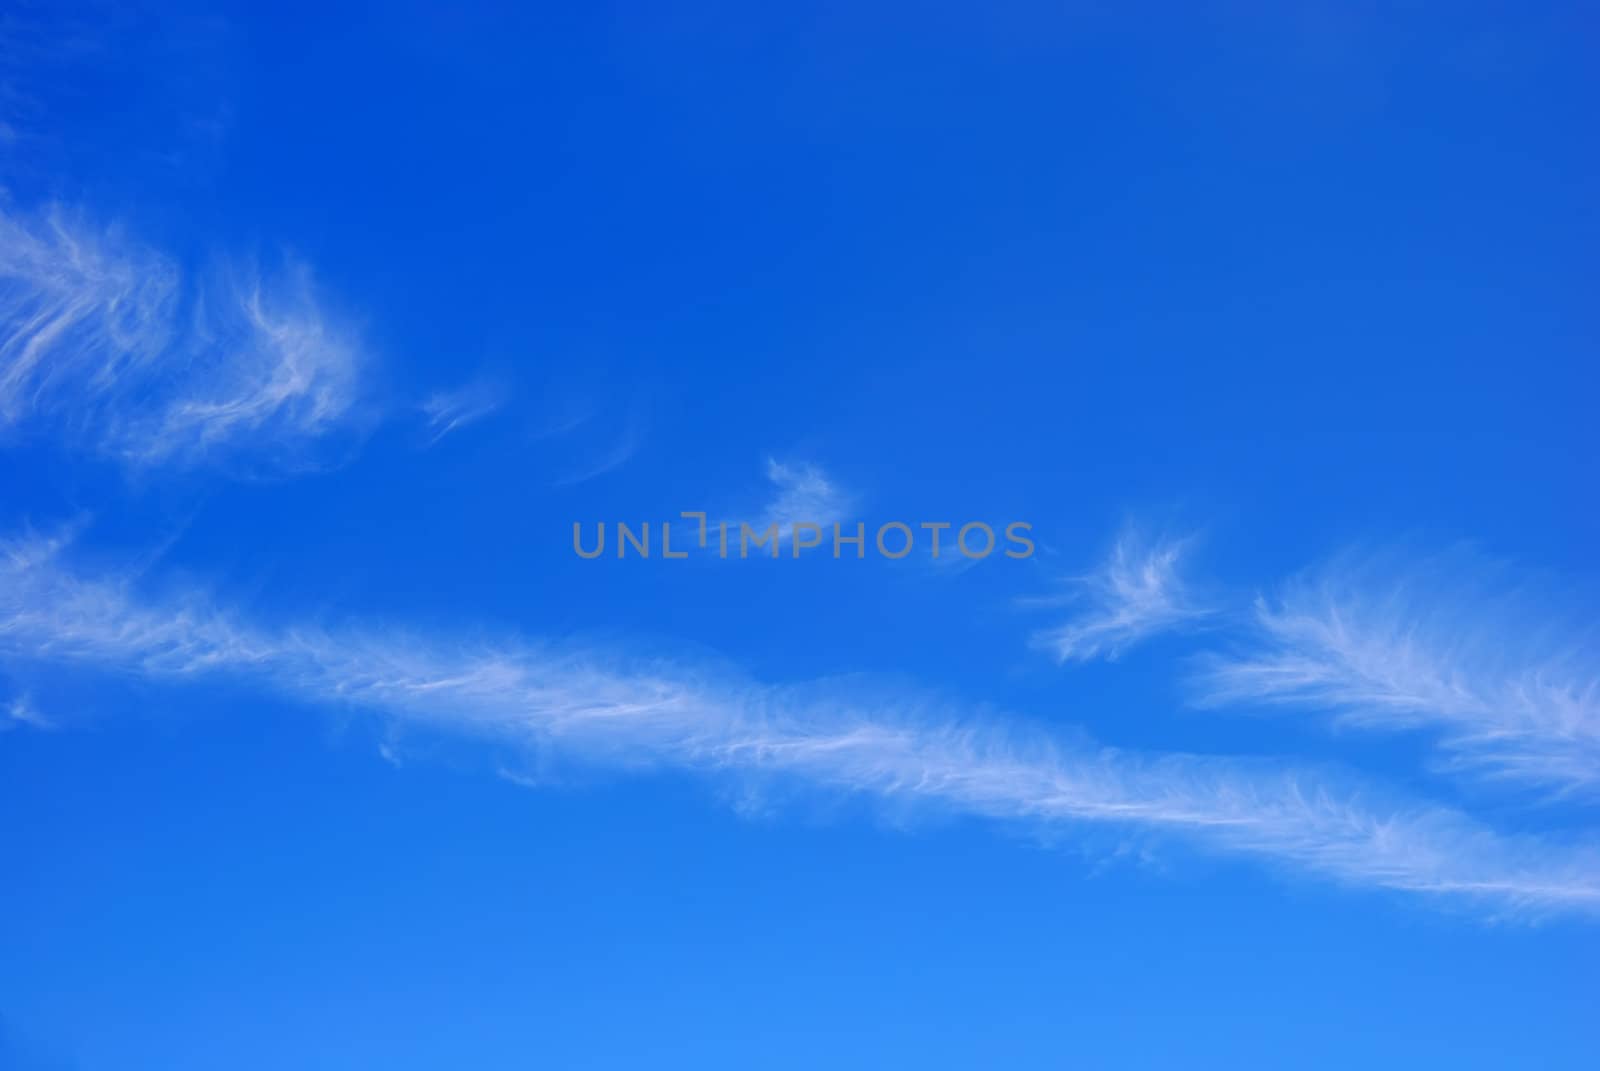 Blue sky with two diagonal white cloud stripes.